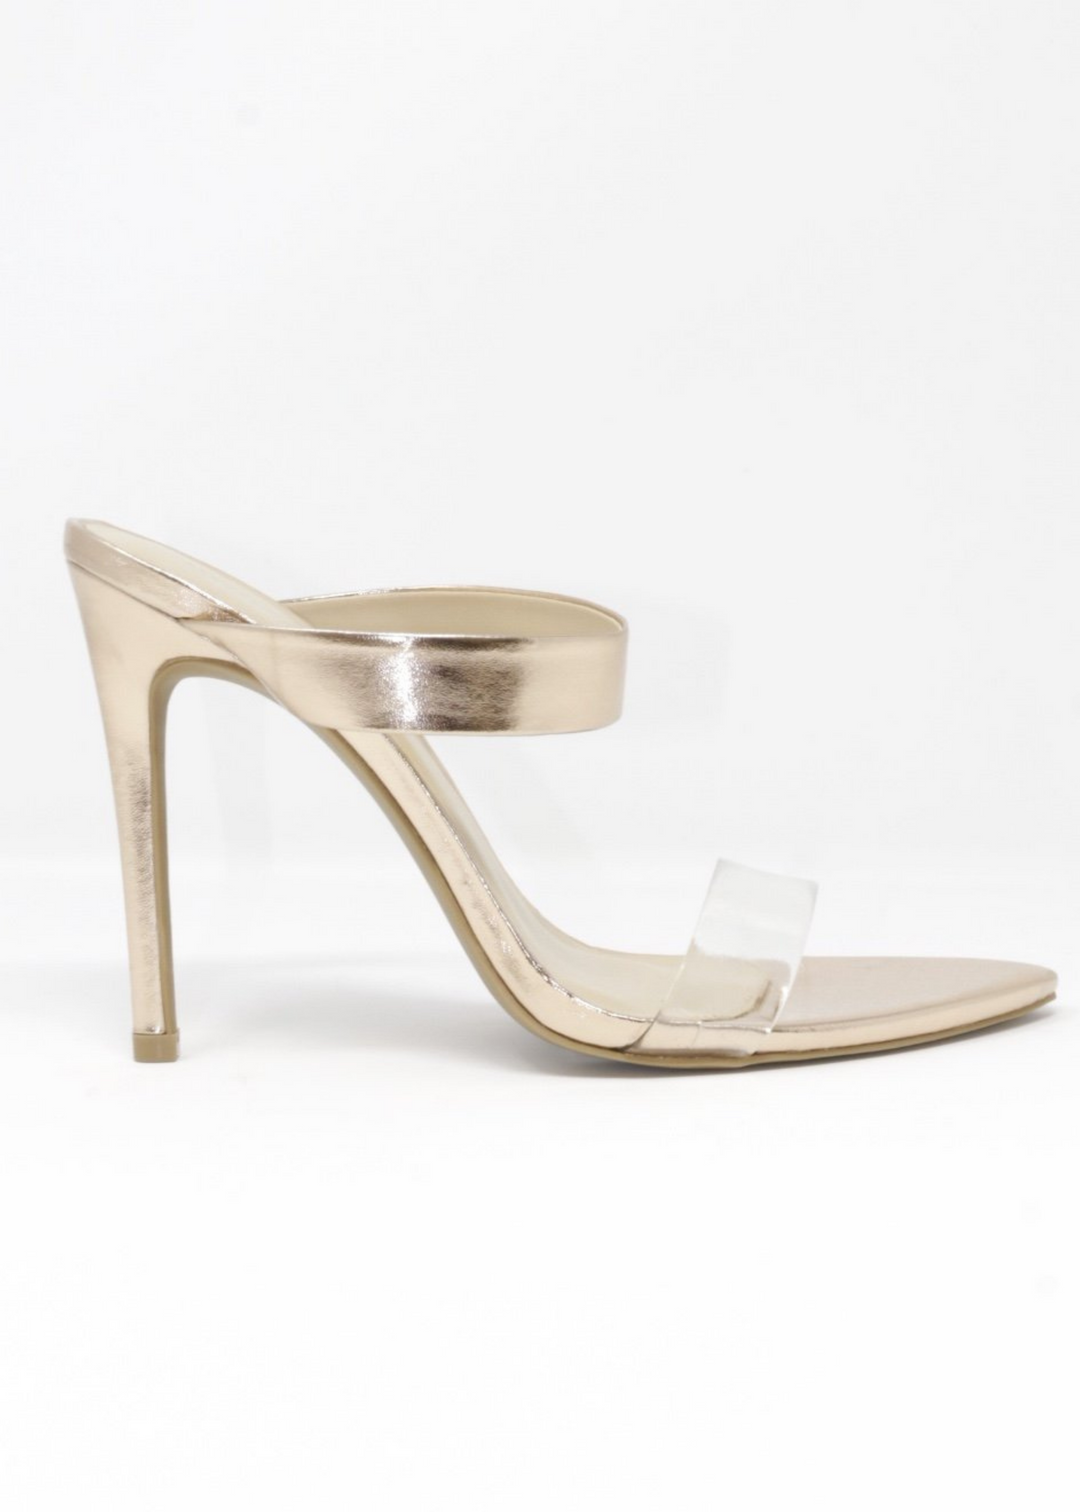 Audrey Heels with Clear Strap in RoseGold